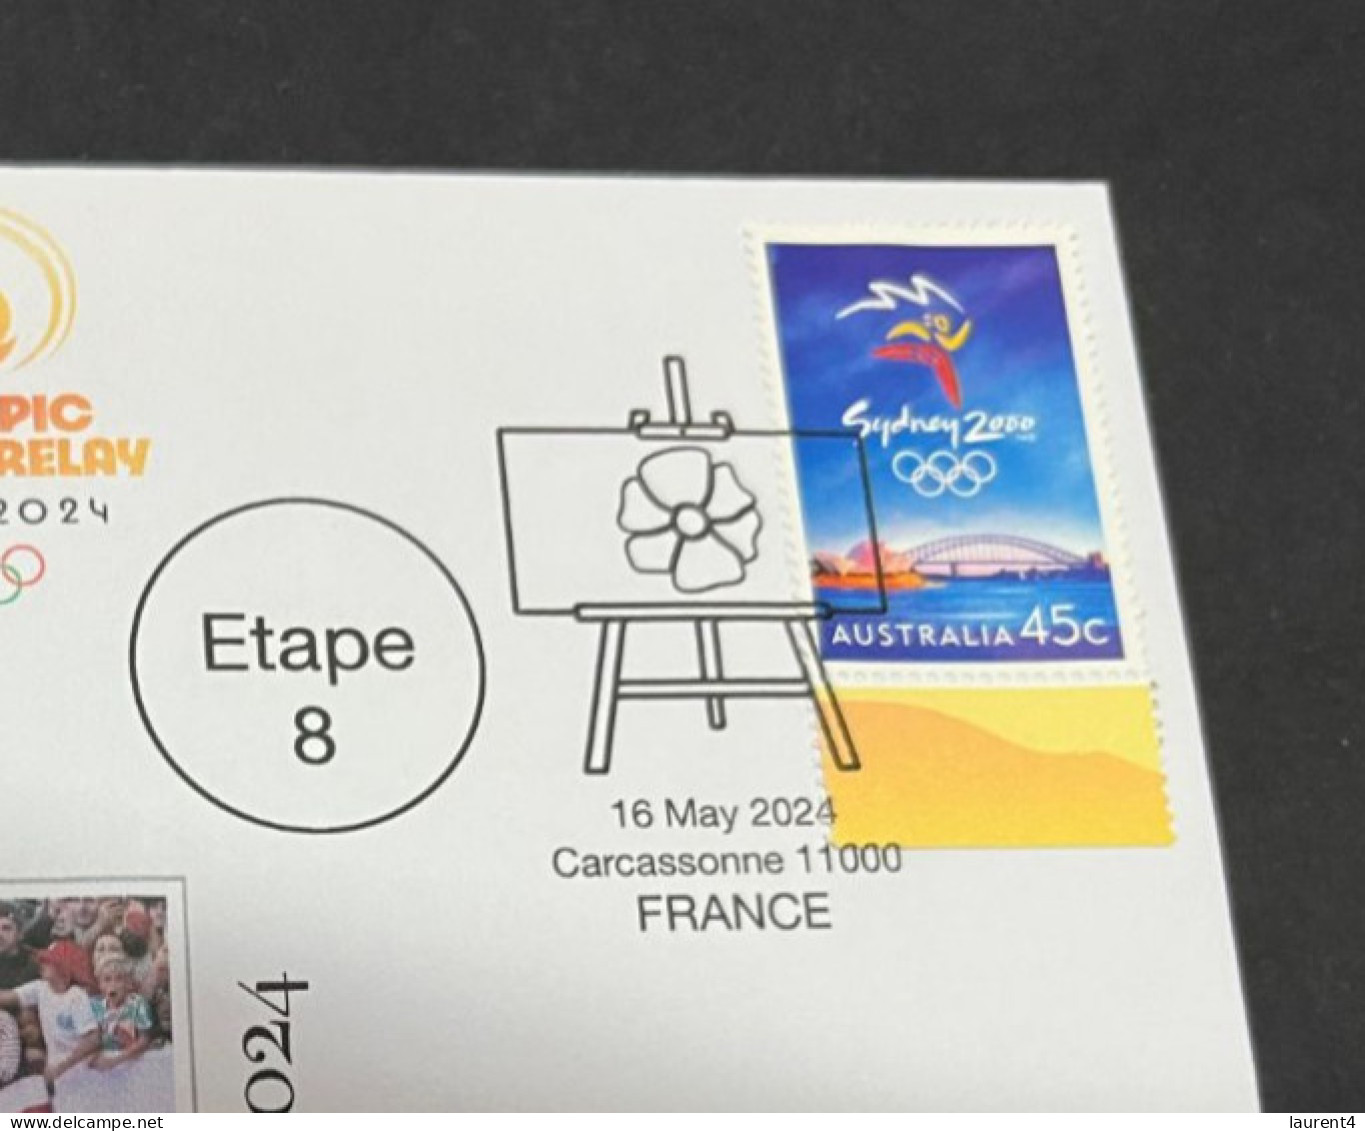 17-5-2024 (5 Z 17) Paris Olympic Games 2024 - Torch Relay (Etape 8) In Carcassonne (16-5-2024) With OLYMPIC Stamp - Eté 2024 : Paris